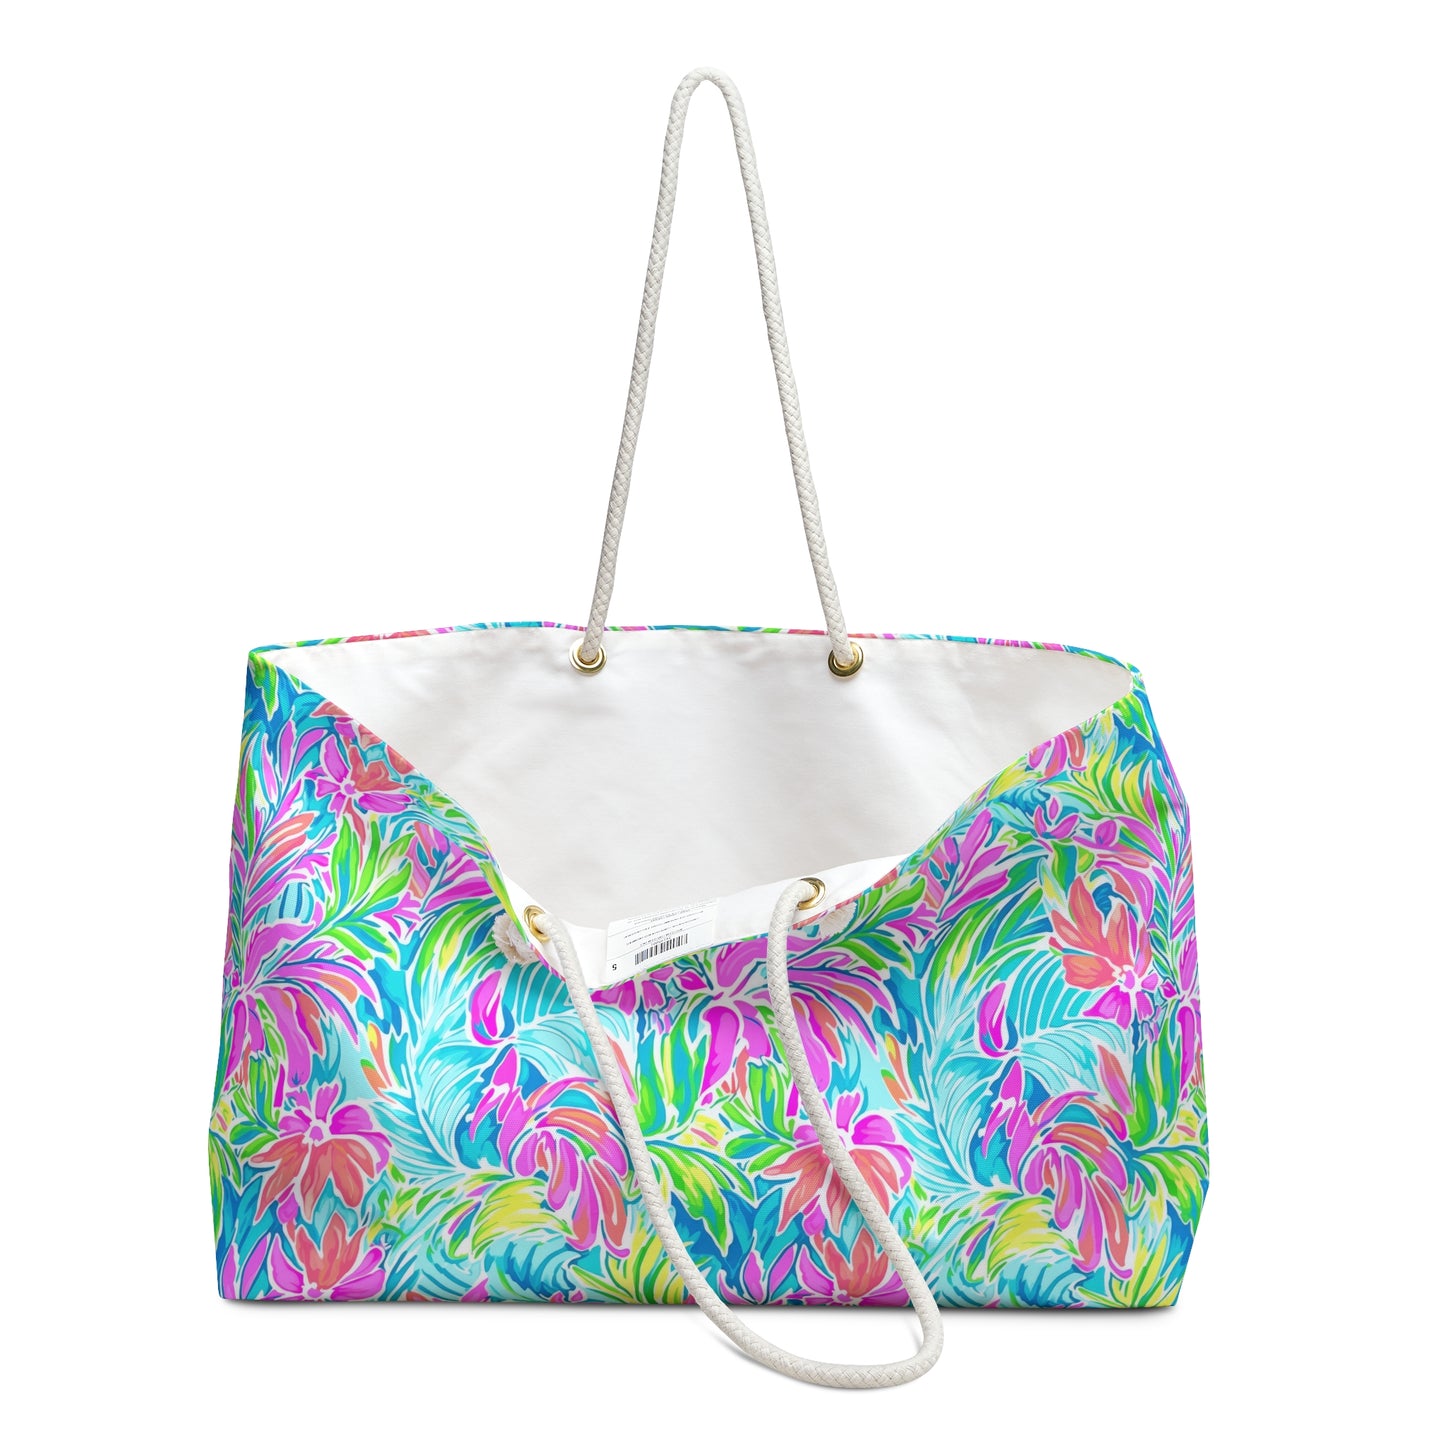 Neon Tropics: Vibrant Rainbow Flowers and Palm Leaves in Electric Splendor Oversized Weekender Bag